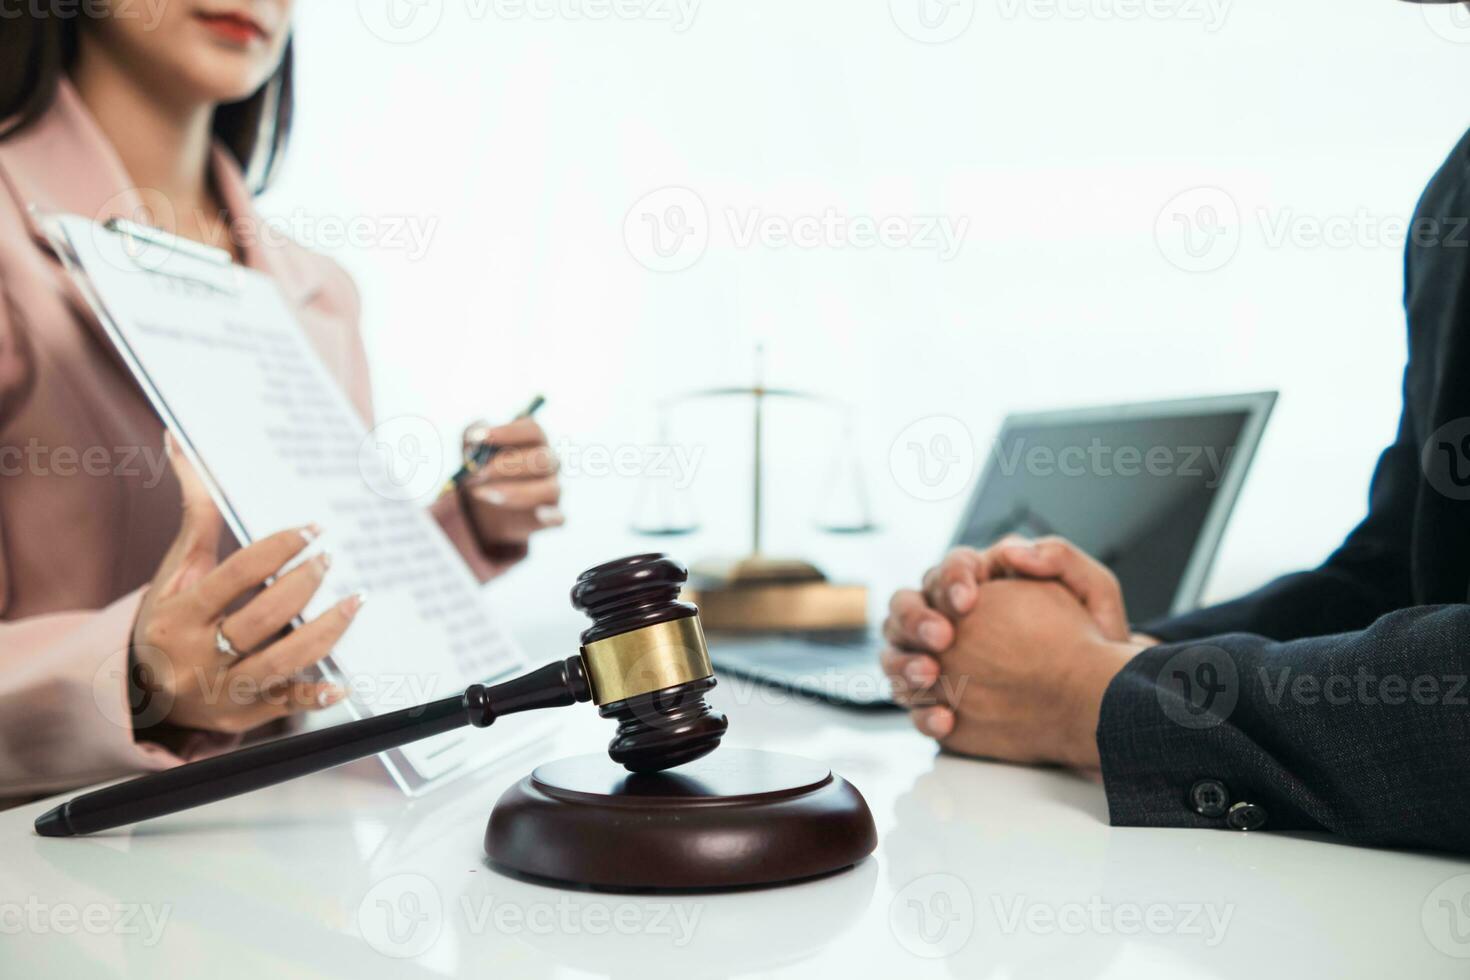 judge's gavel in law office is placed on table to symbolize judge deciding lawsuit. gavel wood on wooden table of lawyers in legal advice office as symbol of fair judgment in cases. photo